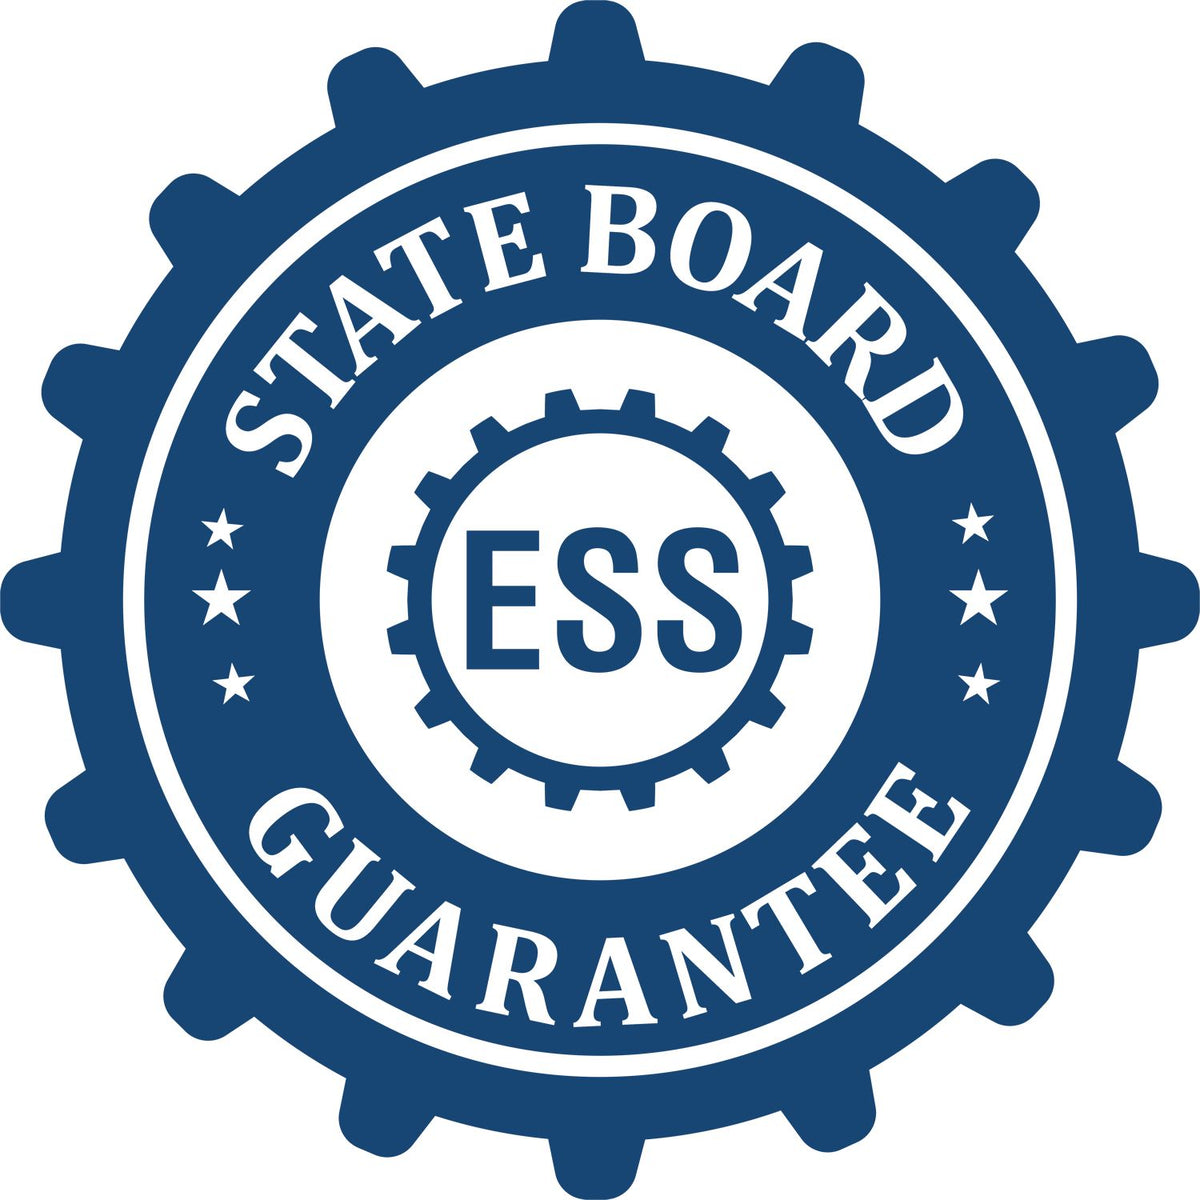 An emblem in a gear shape illustrating a state board guarantee for the Digital Illinois Geologist Stamp, Electronic Seal for Illinois Geologist